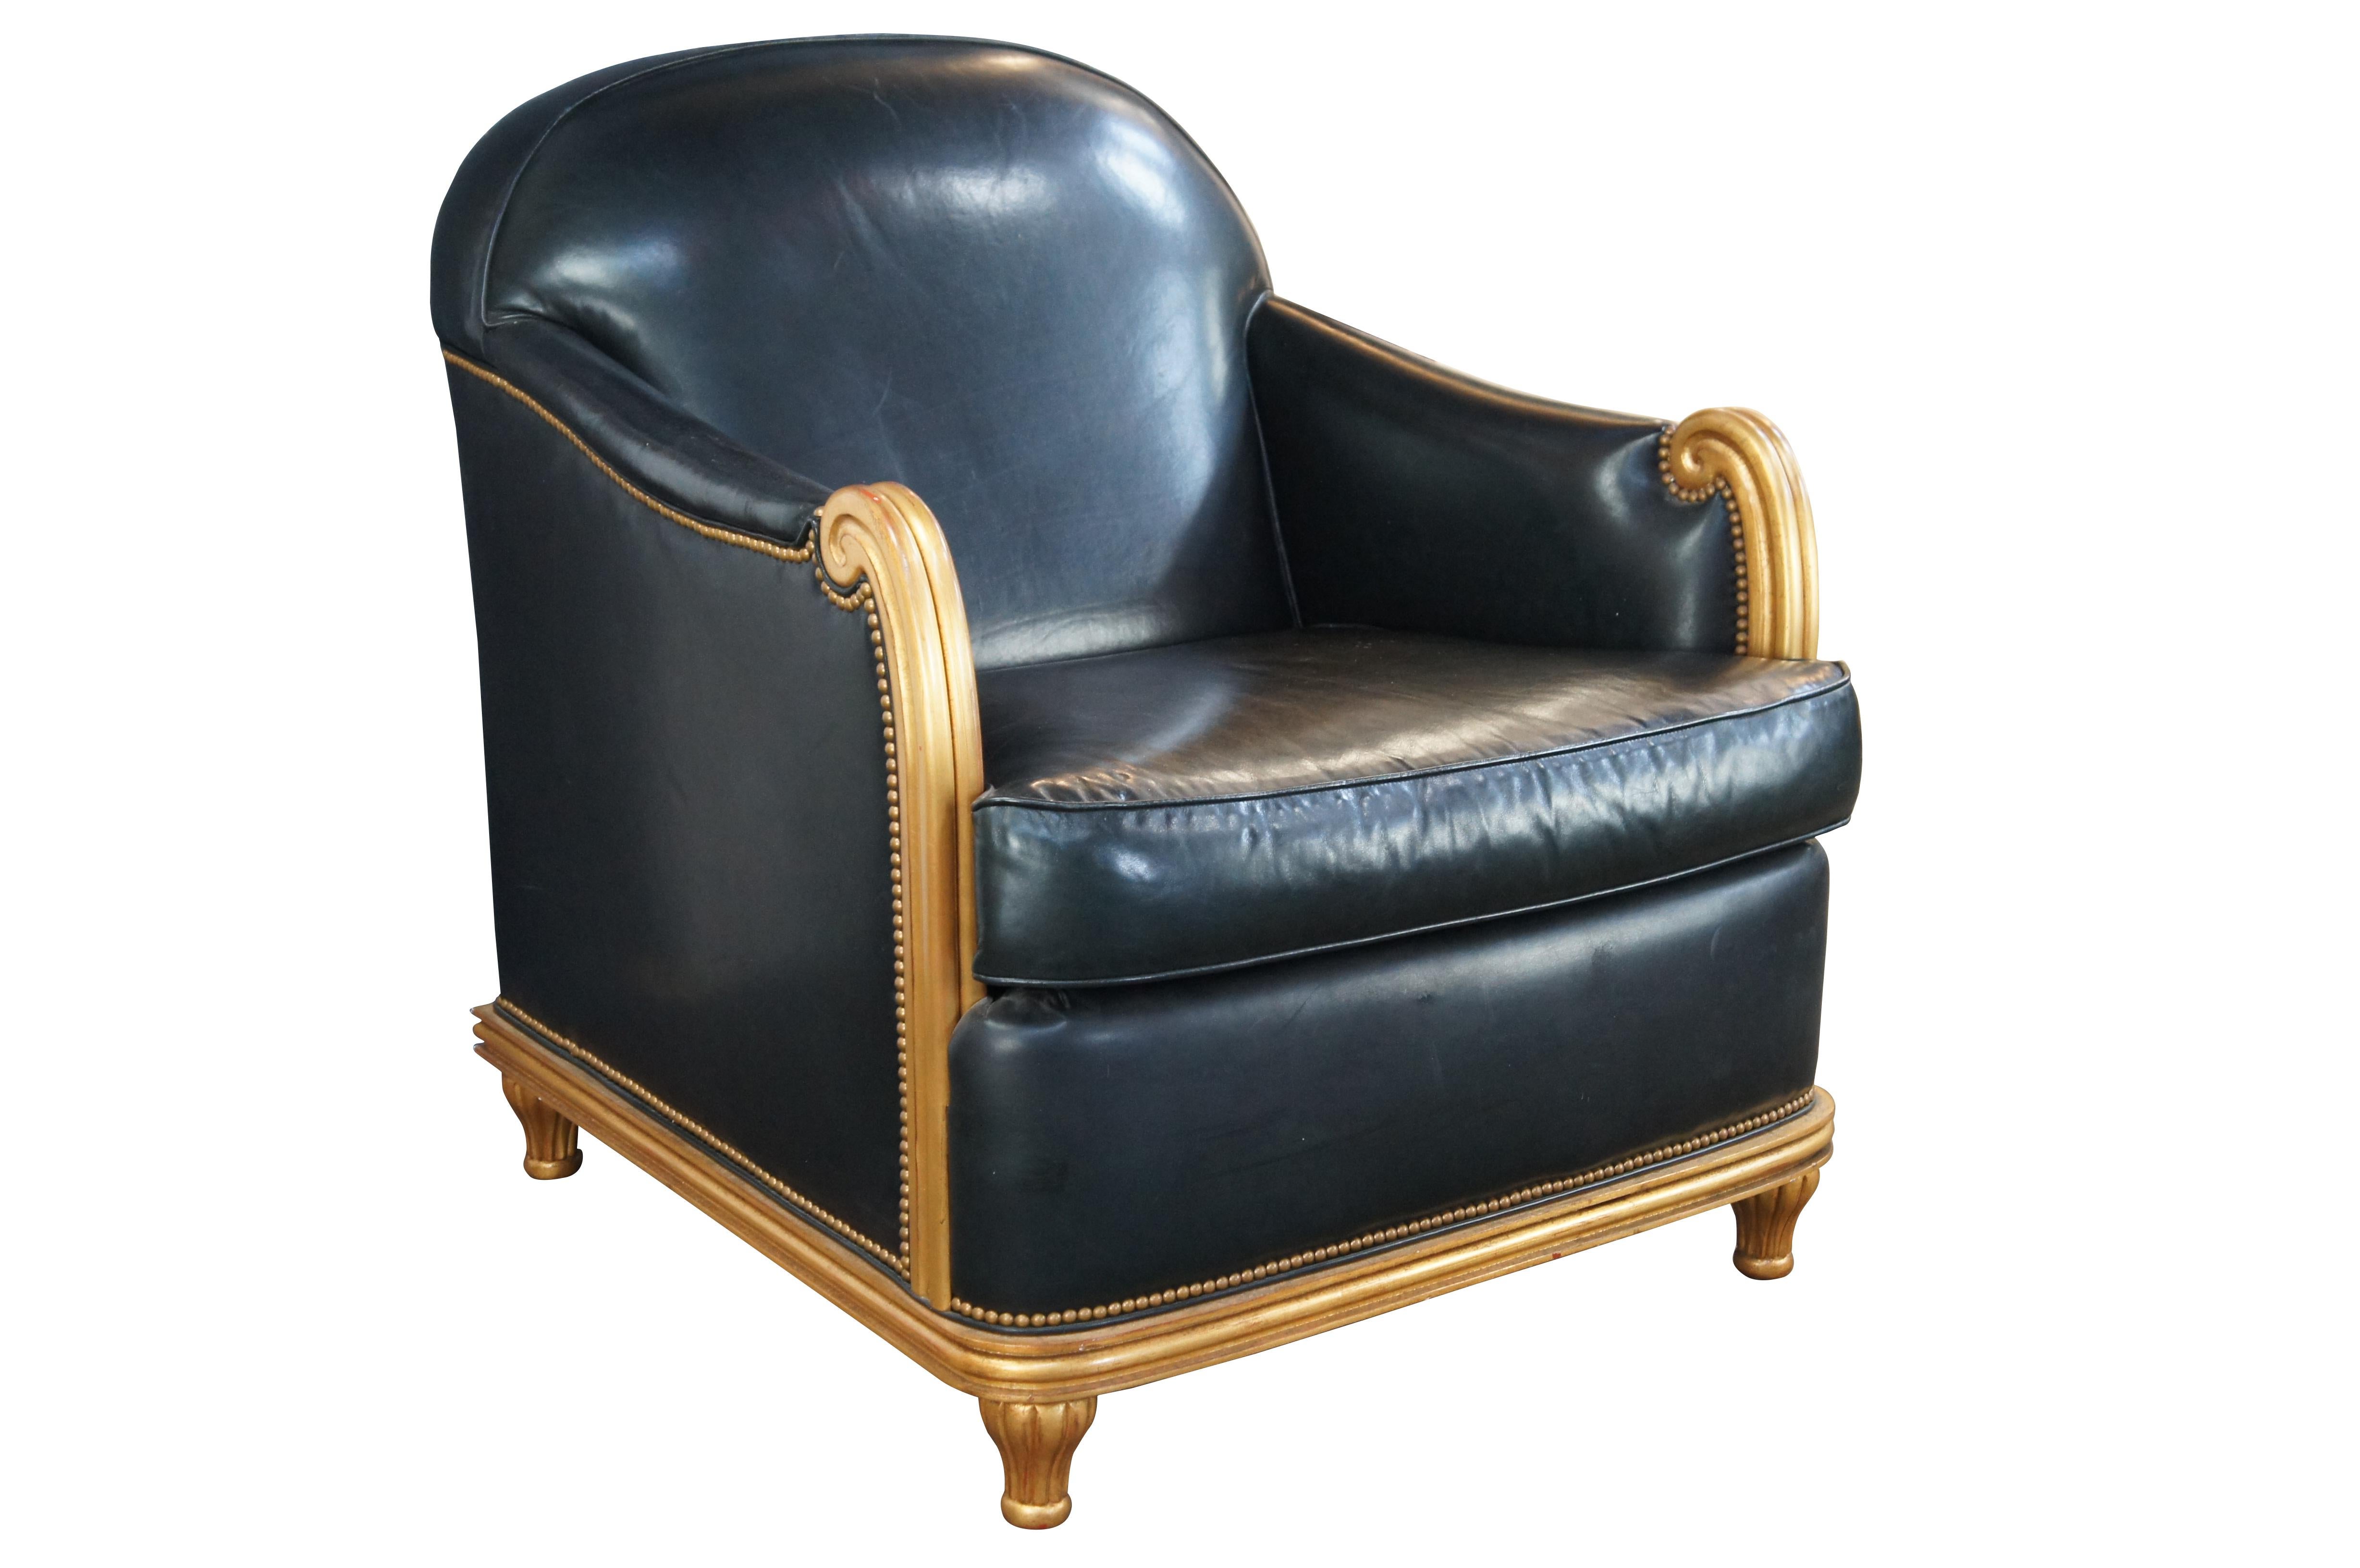 Late 20th Century / Early 21st Club chair by Grafton Furniture. Features a French Art Deco inspired frame with curved back and scrolled arms. The chair is finished in gold with black leather upholstery and brass nailhead trim. The frame is supported